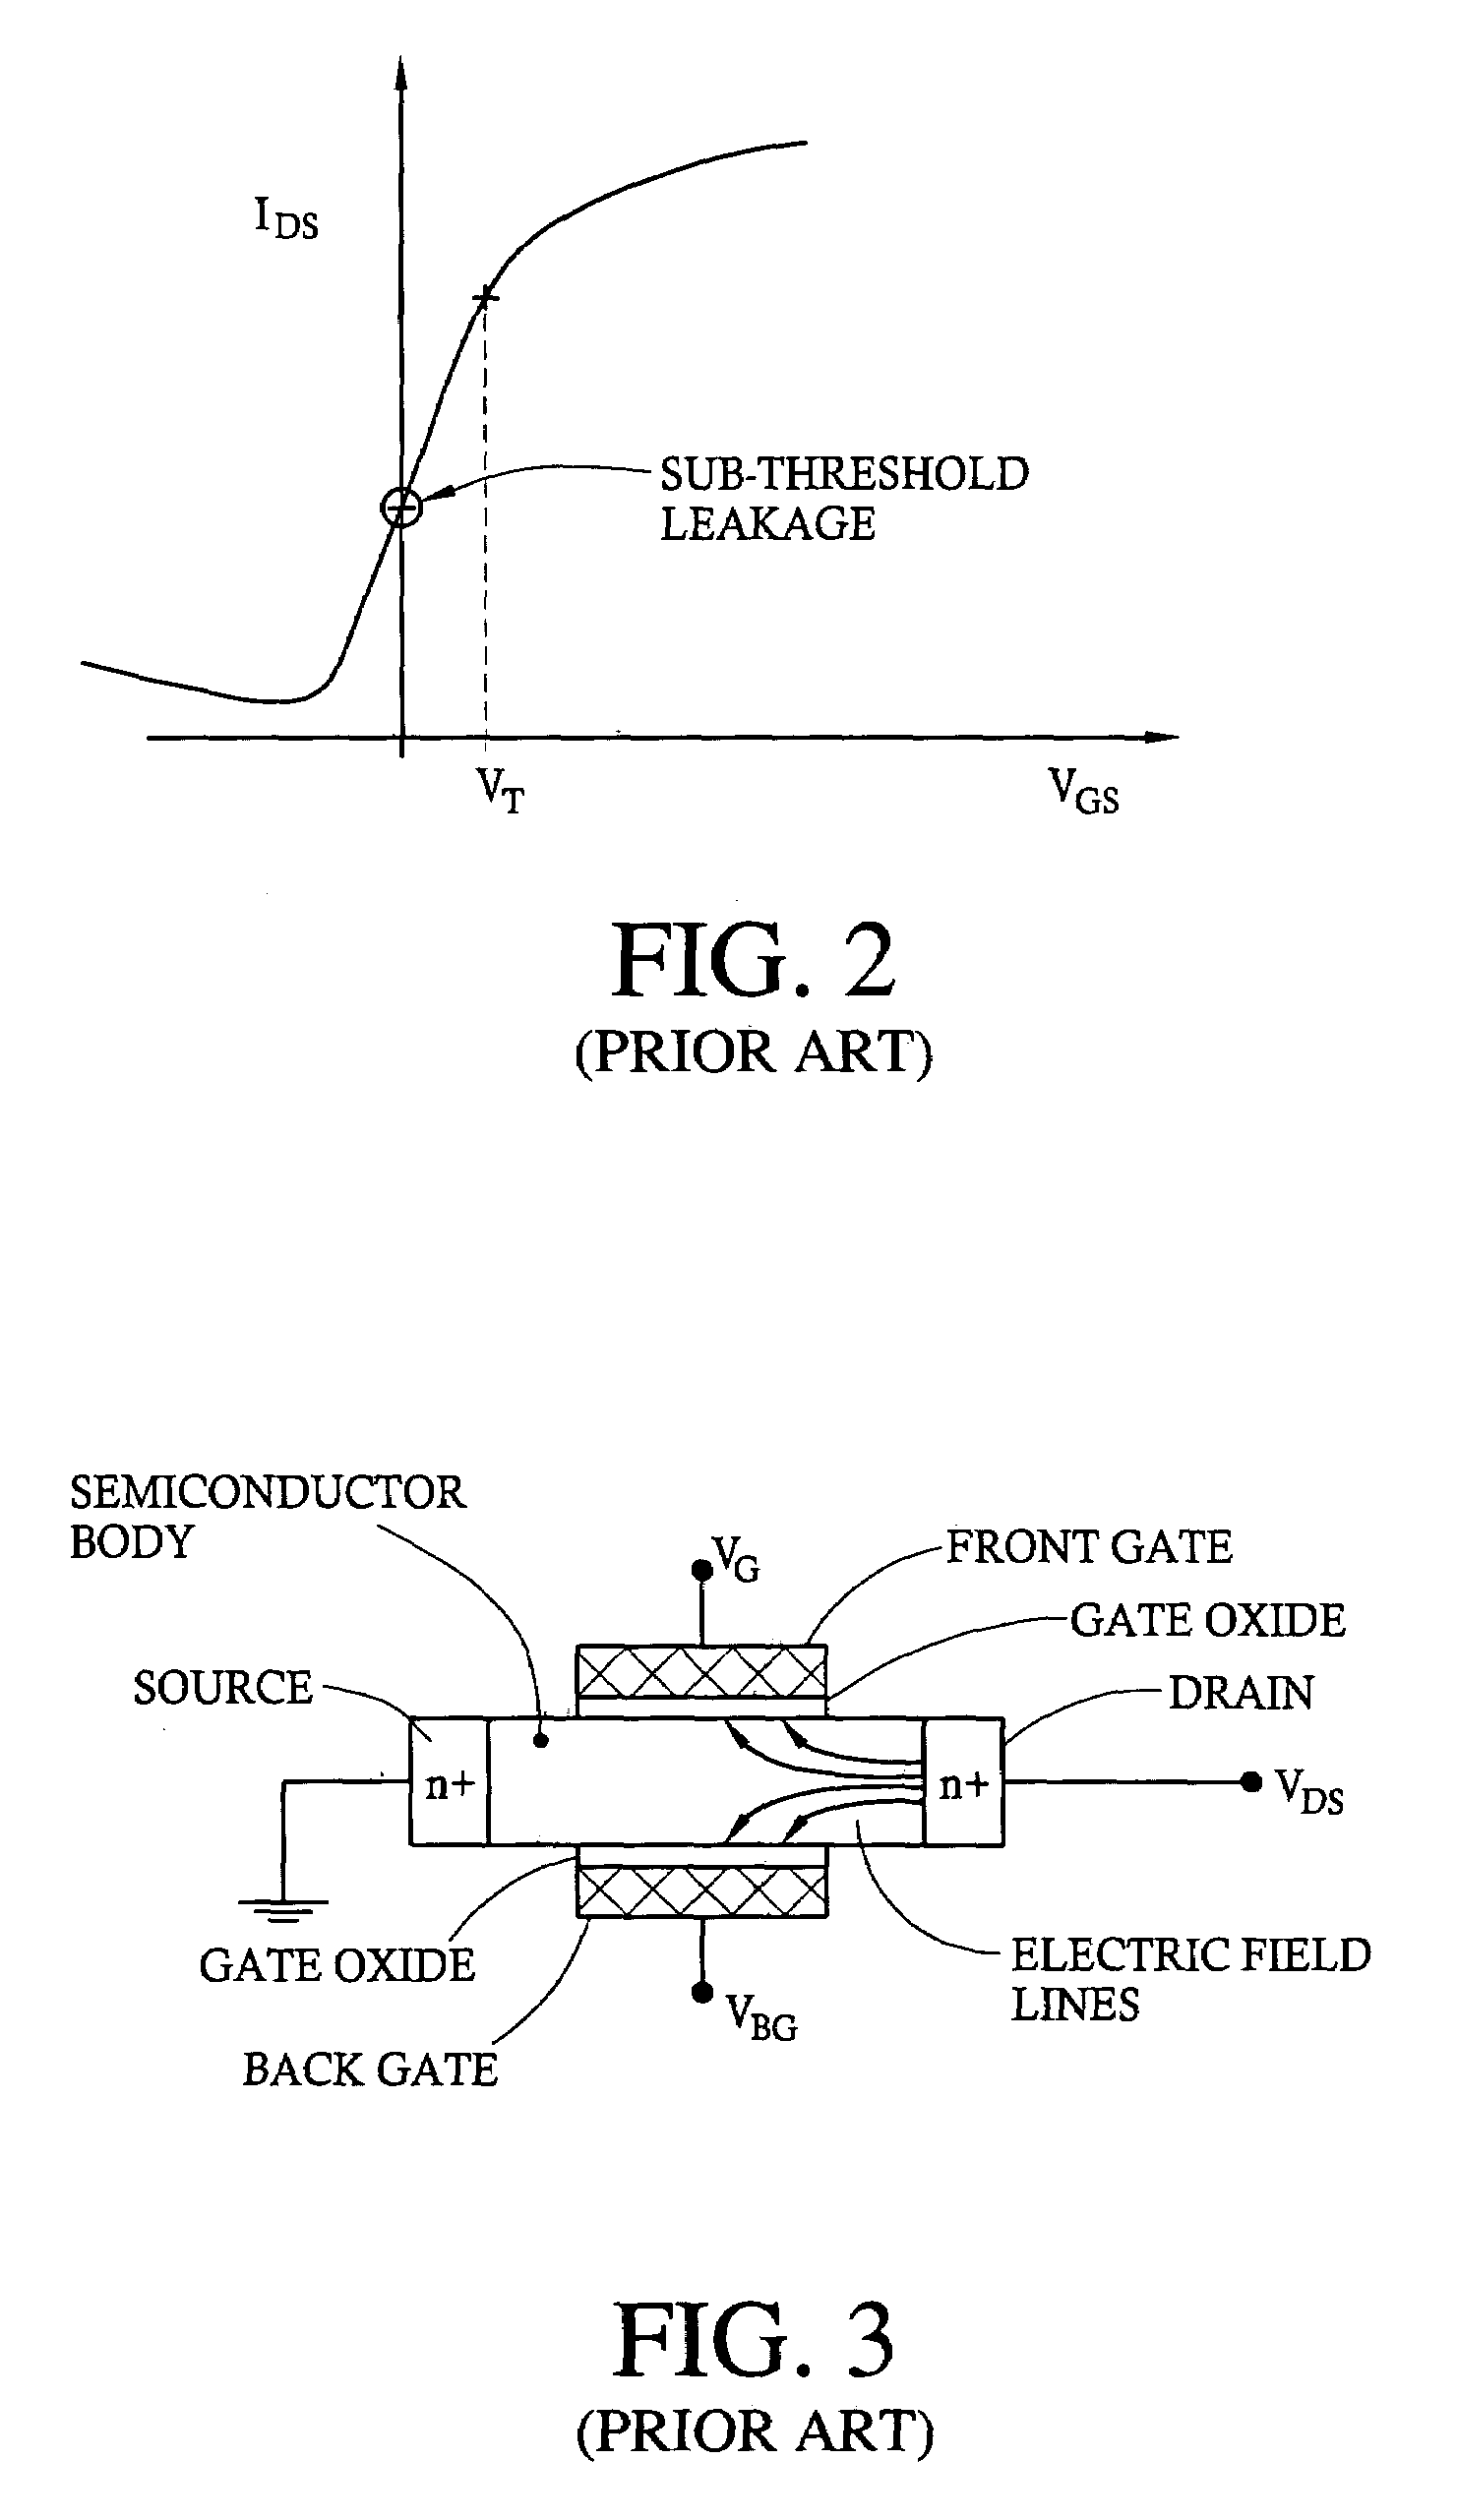 Memory array with surrounding gate access transistors and capacitors with global and staggered local bit lines